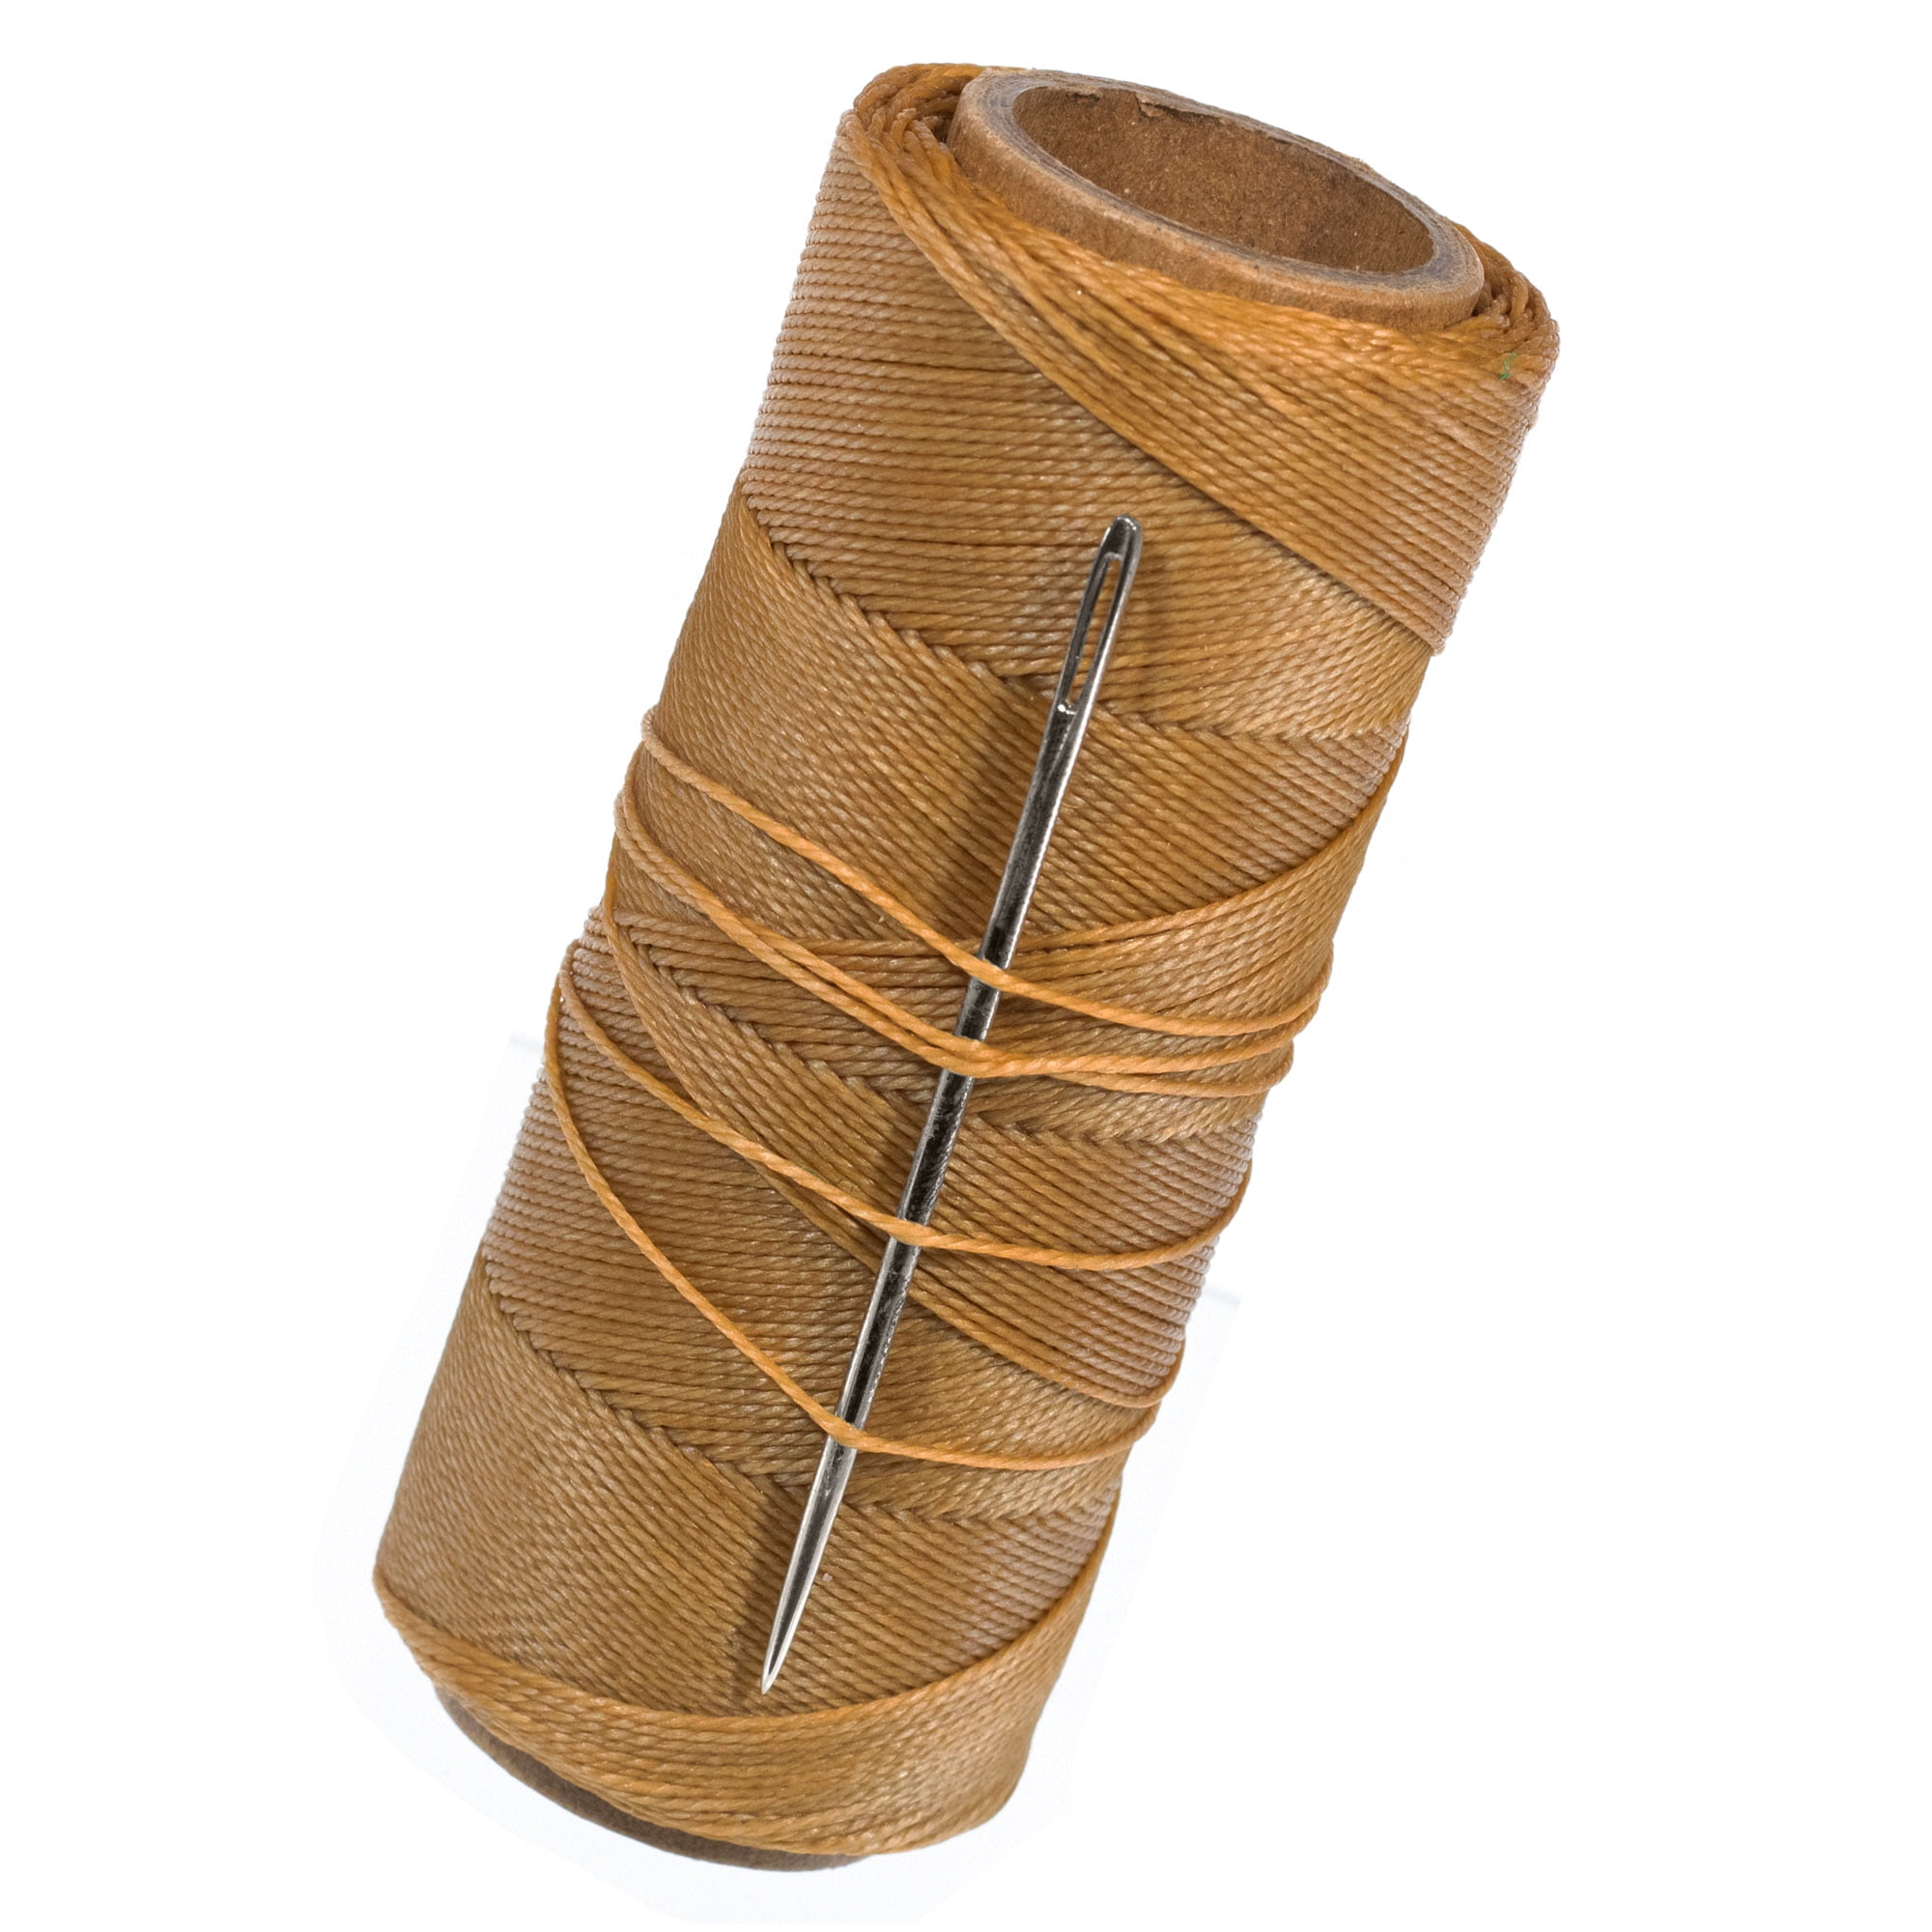 Waxed Polyester Sail Twine with Stitching Needle - 270 Foot Spool - 2 oz  String Ideal for Rope Whipping, Canvas Work, Sail Making, and More 